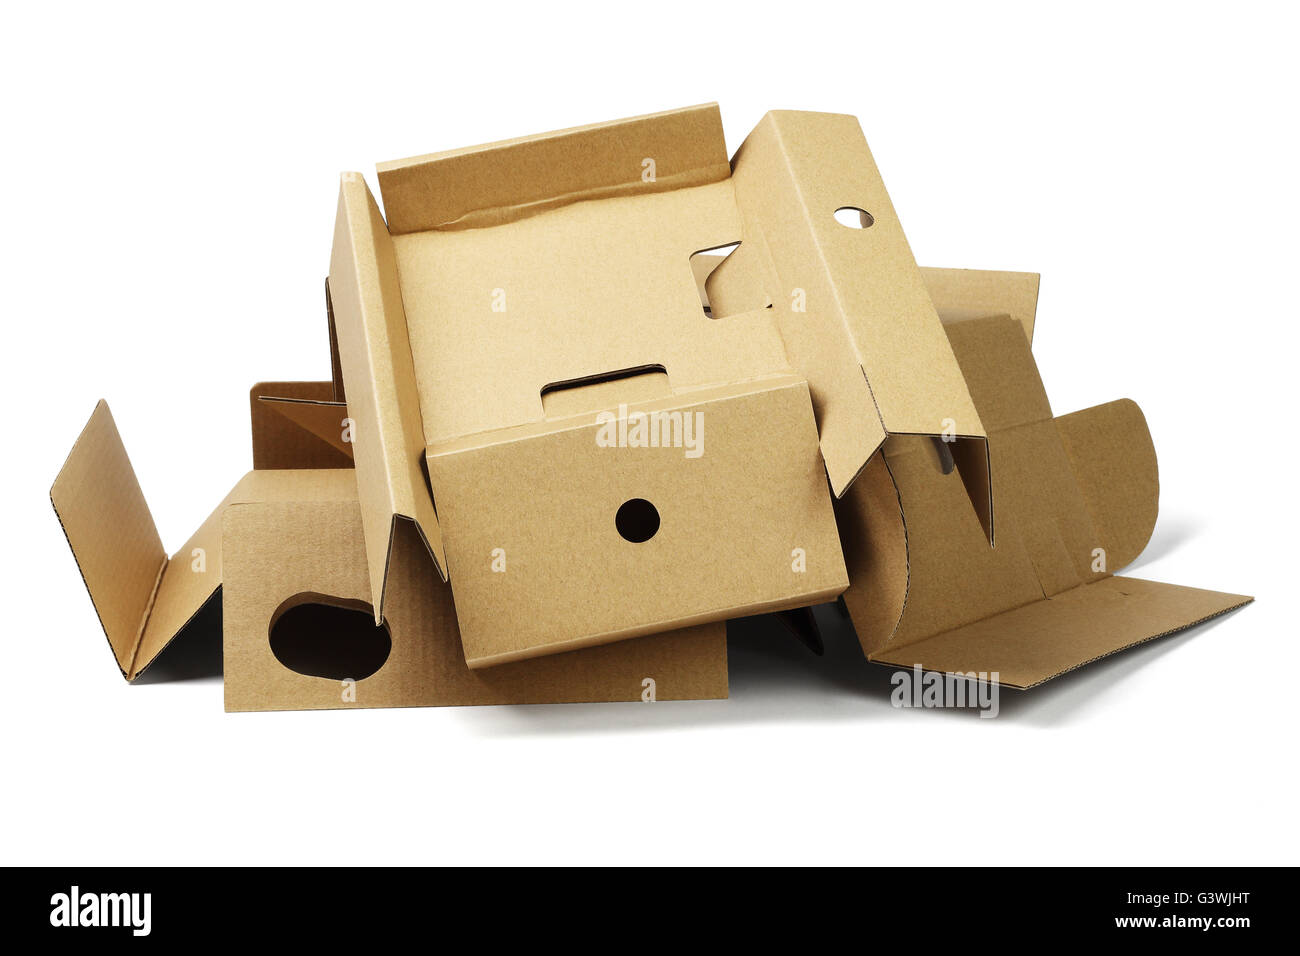 Pile of Package Cardboard For Recycling on White Background Stock Photo